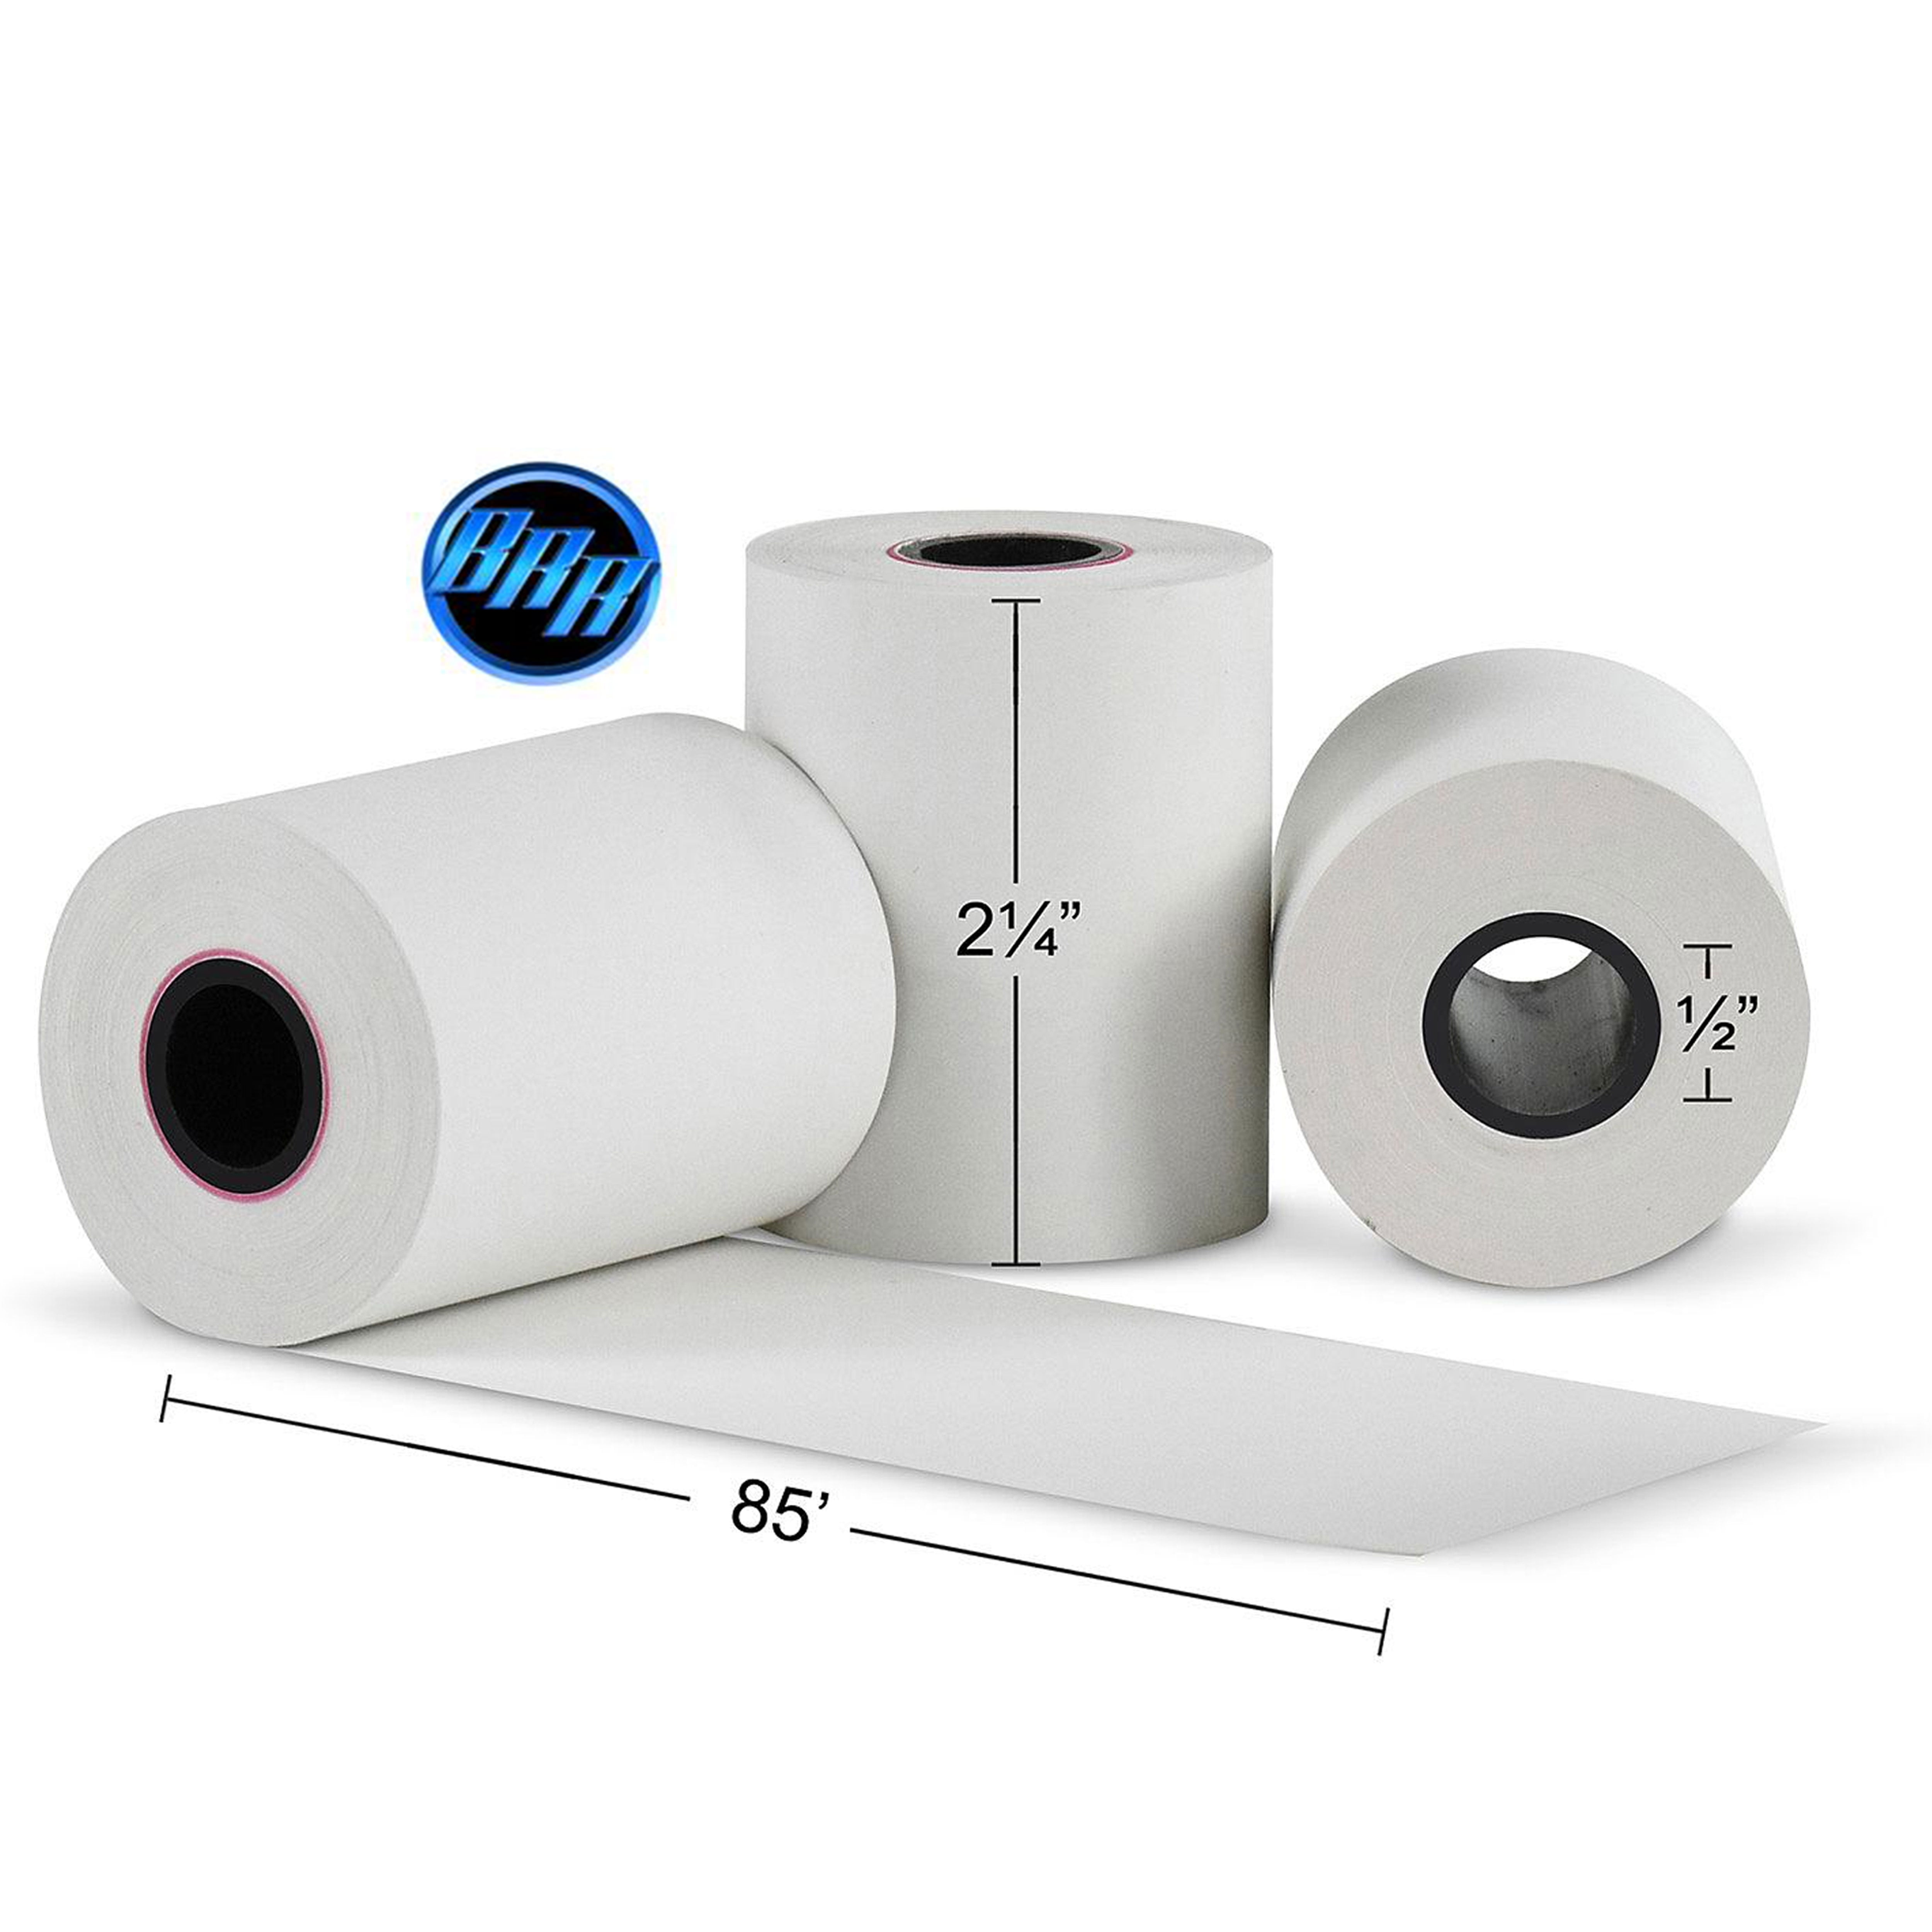 12 ROLLS CLOVER MINI & CLOVER MOBILE 2-1/4" x 85' THERMAL PAPER 